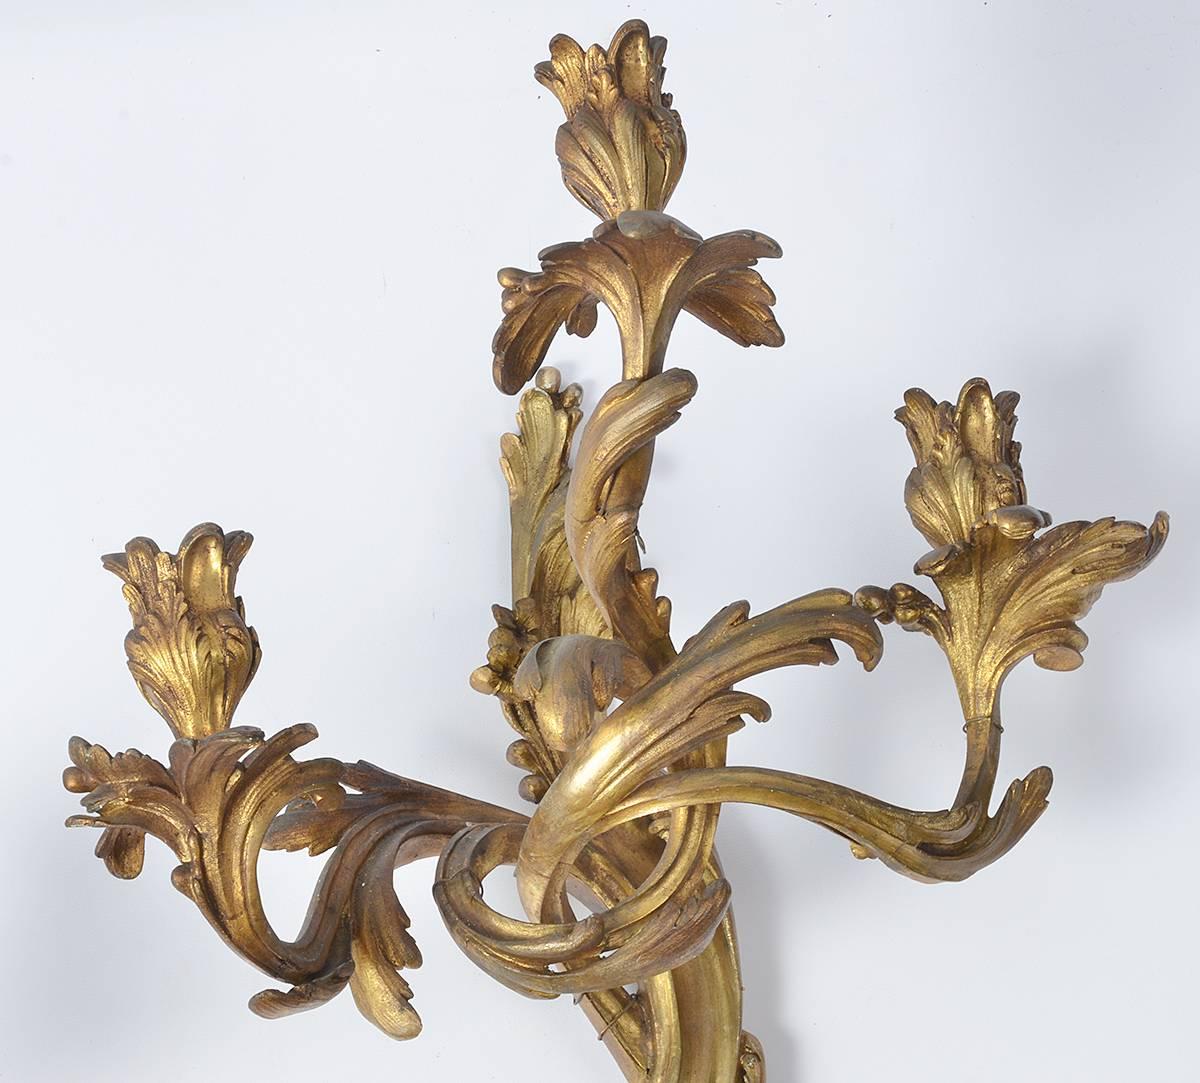 Pair of Louis XV style gilt bronze sconces. Mid-19th century. French wall sconces. Very good condition.